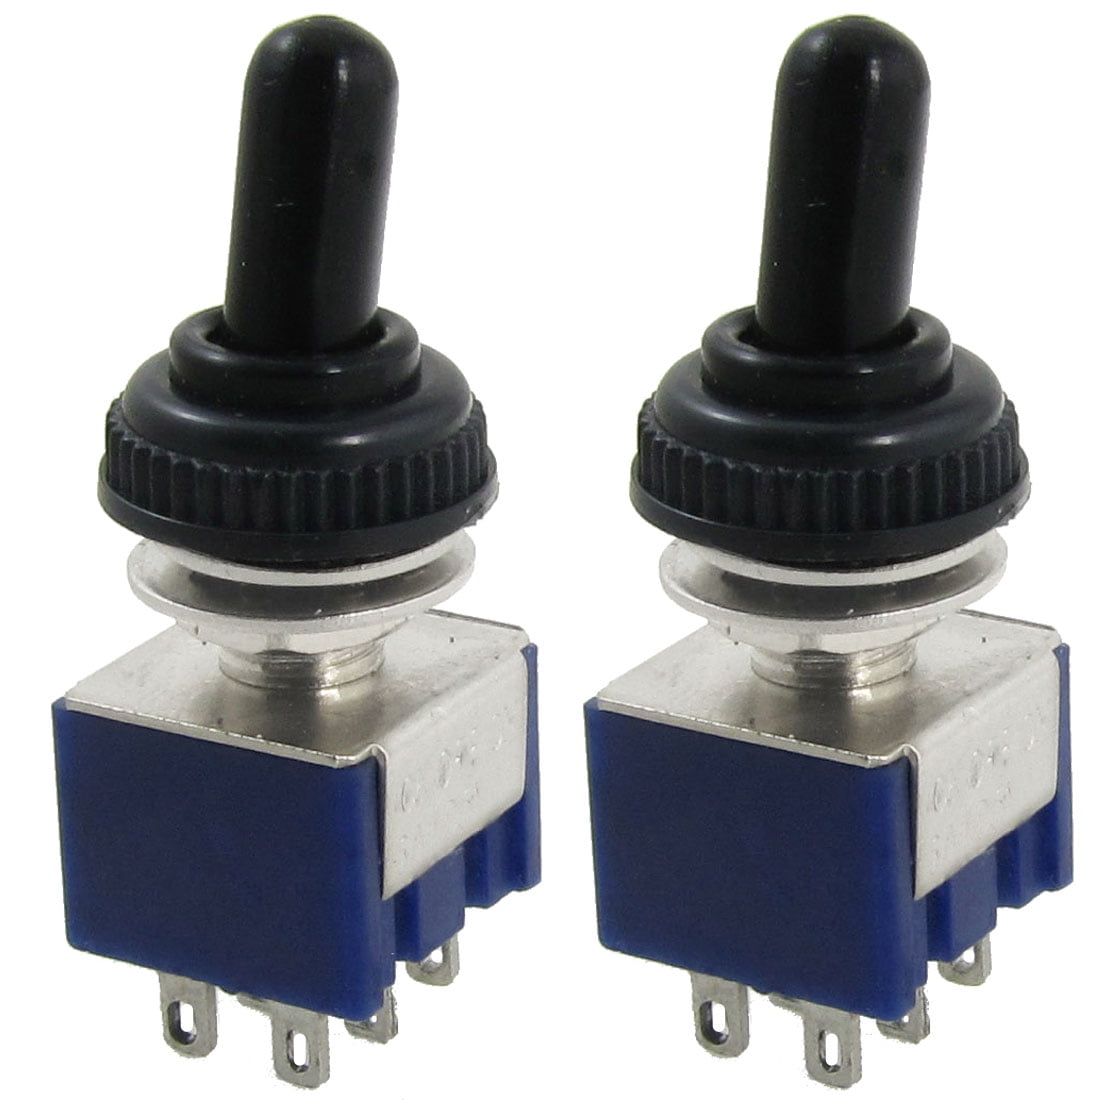 1 Pcs 125V 6A ON/OFF/ON 3 Position SPDT Toggle Switch w Waterproof Cover Cap 